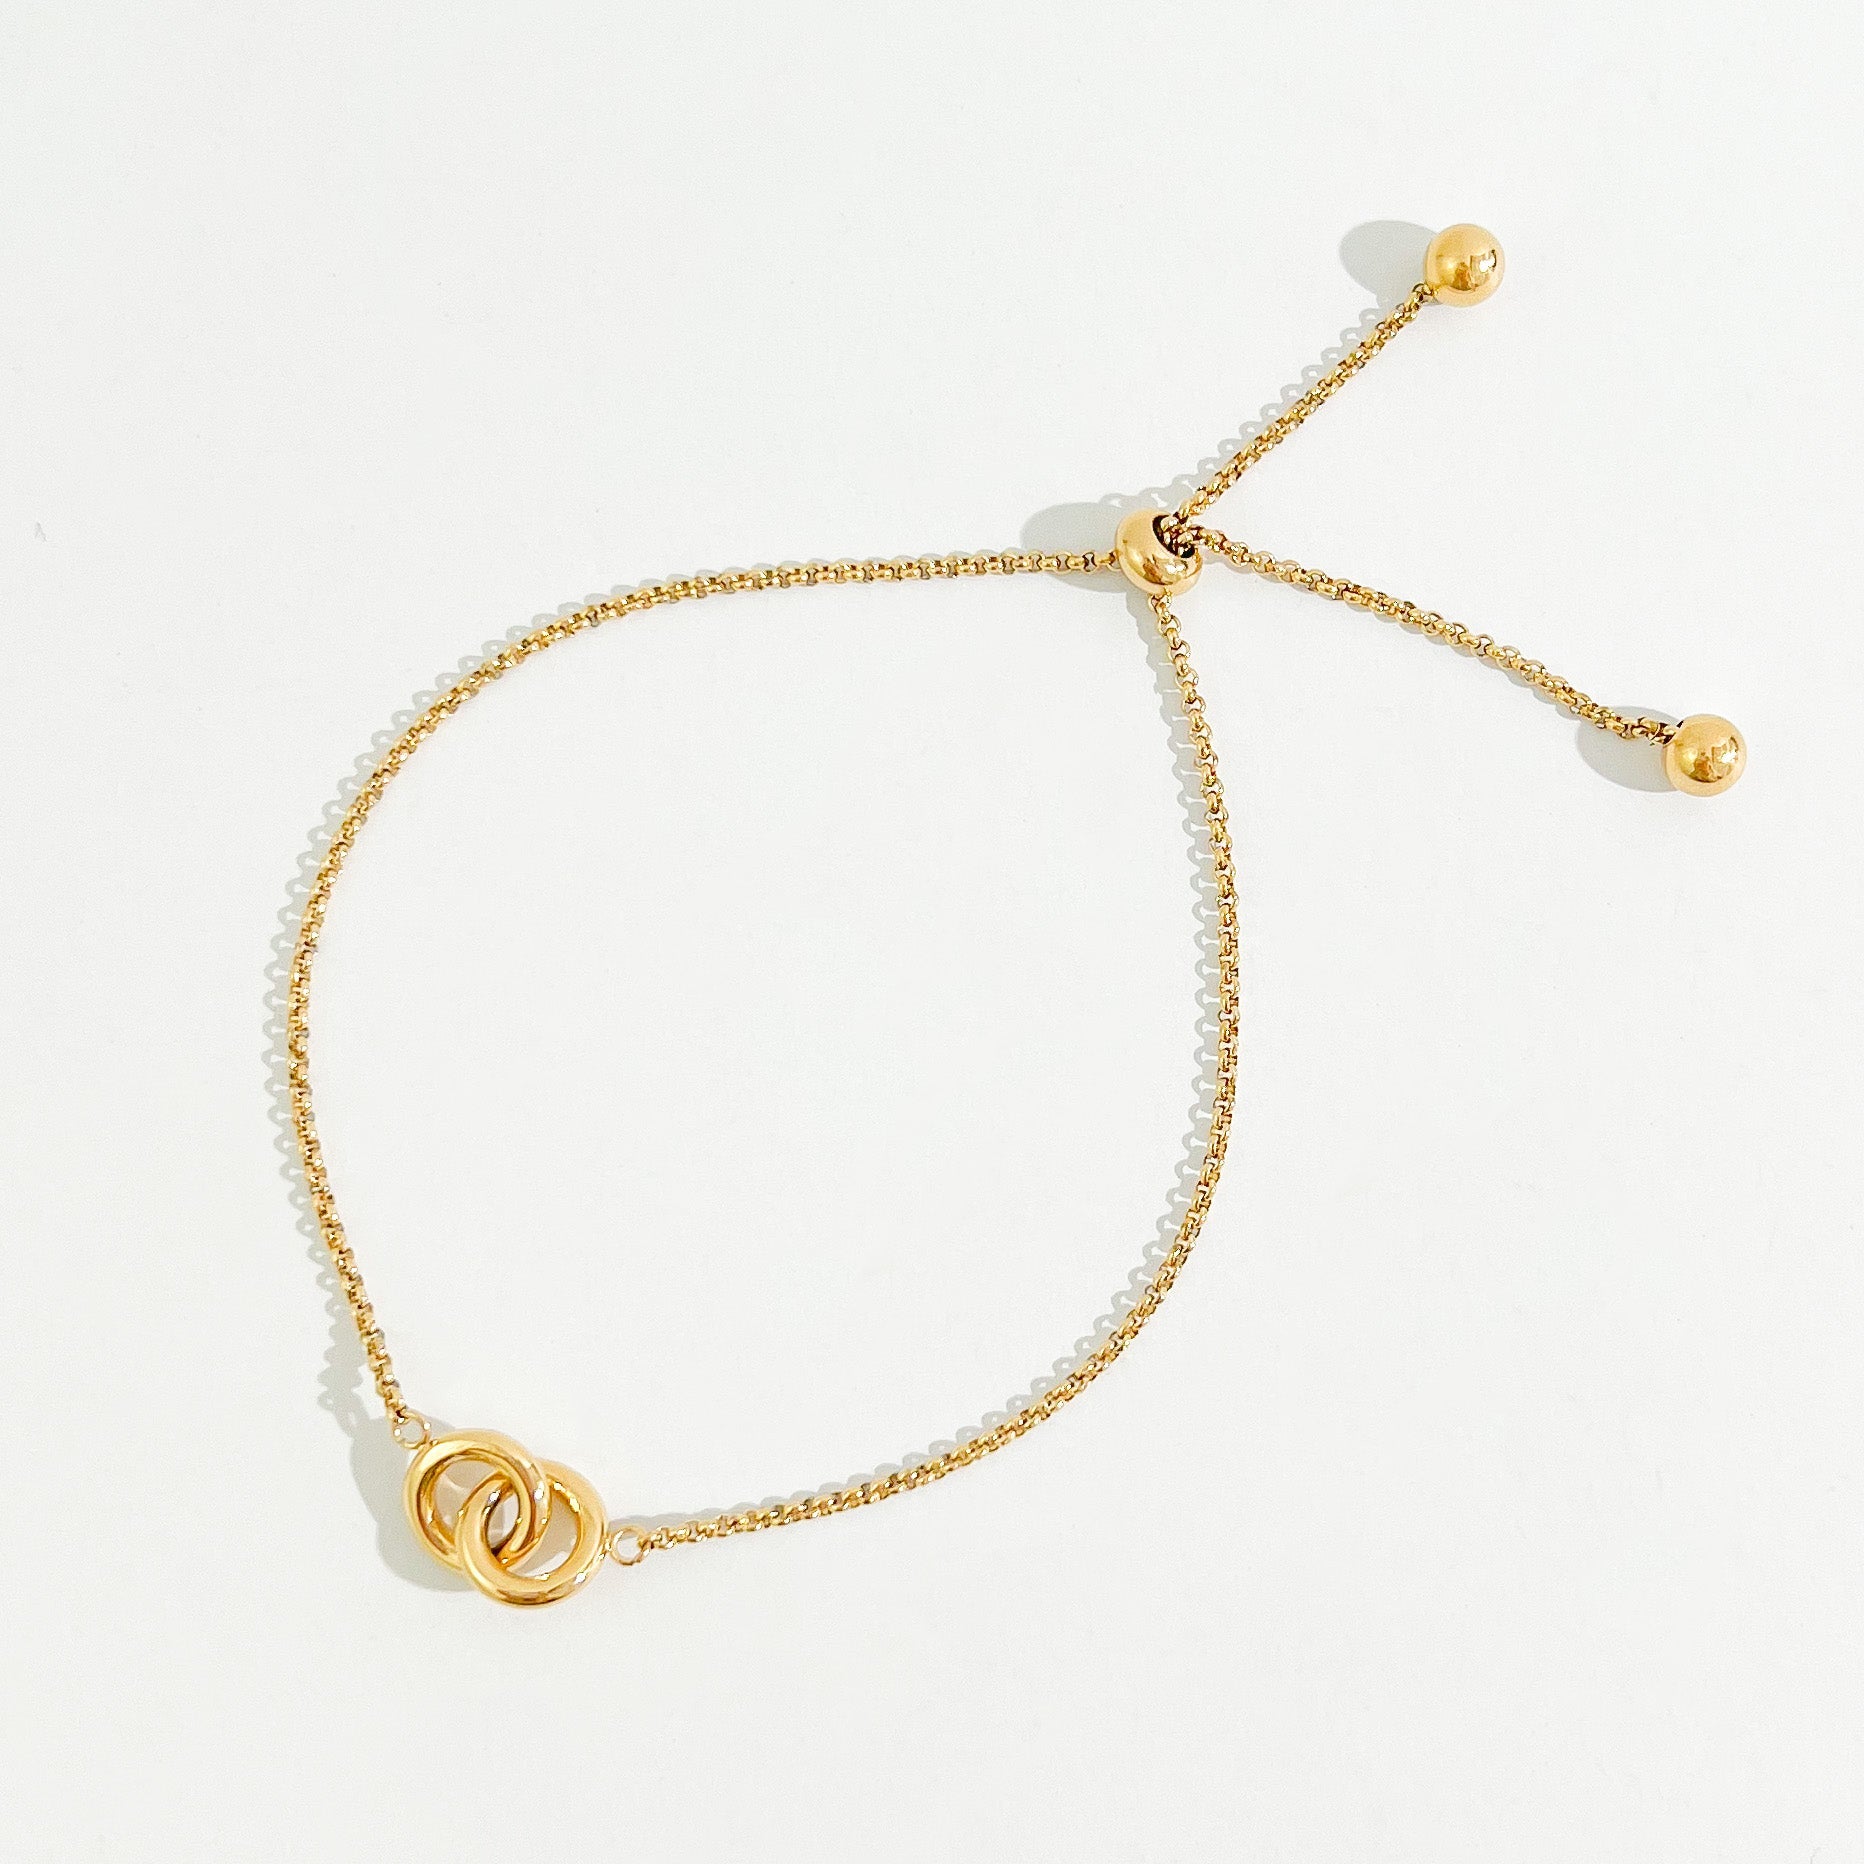 Twin Souls Bracelet in Gold - Flaire & Co.